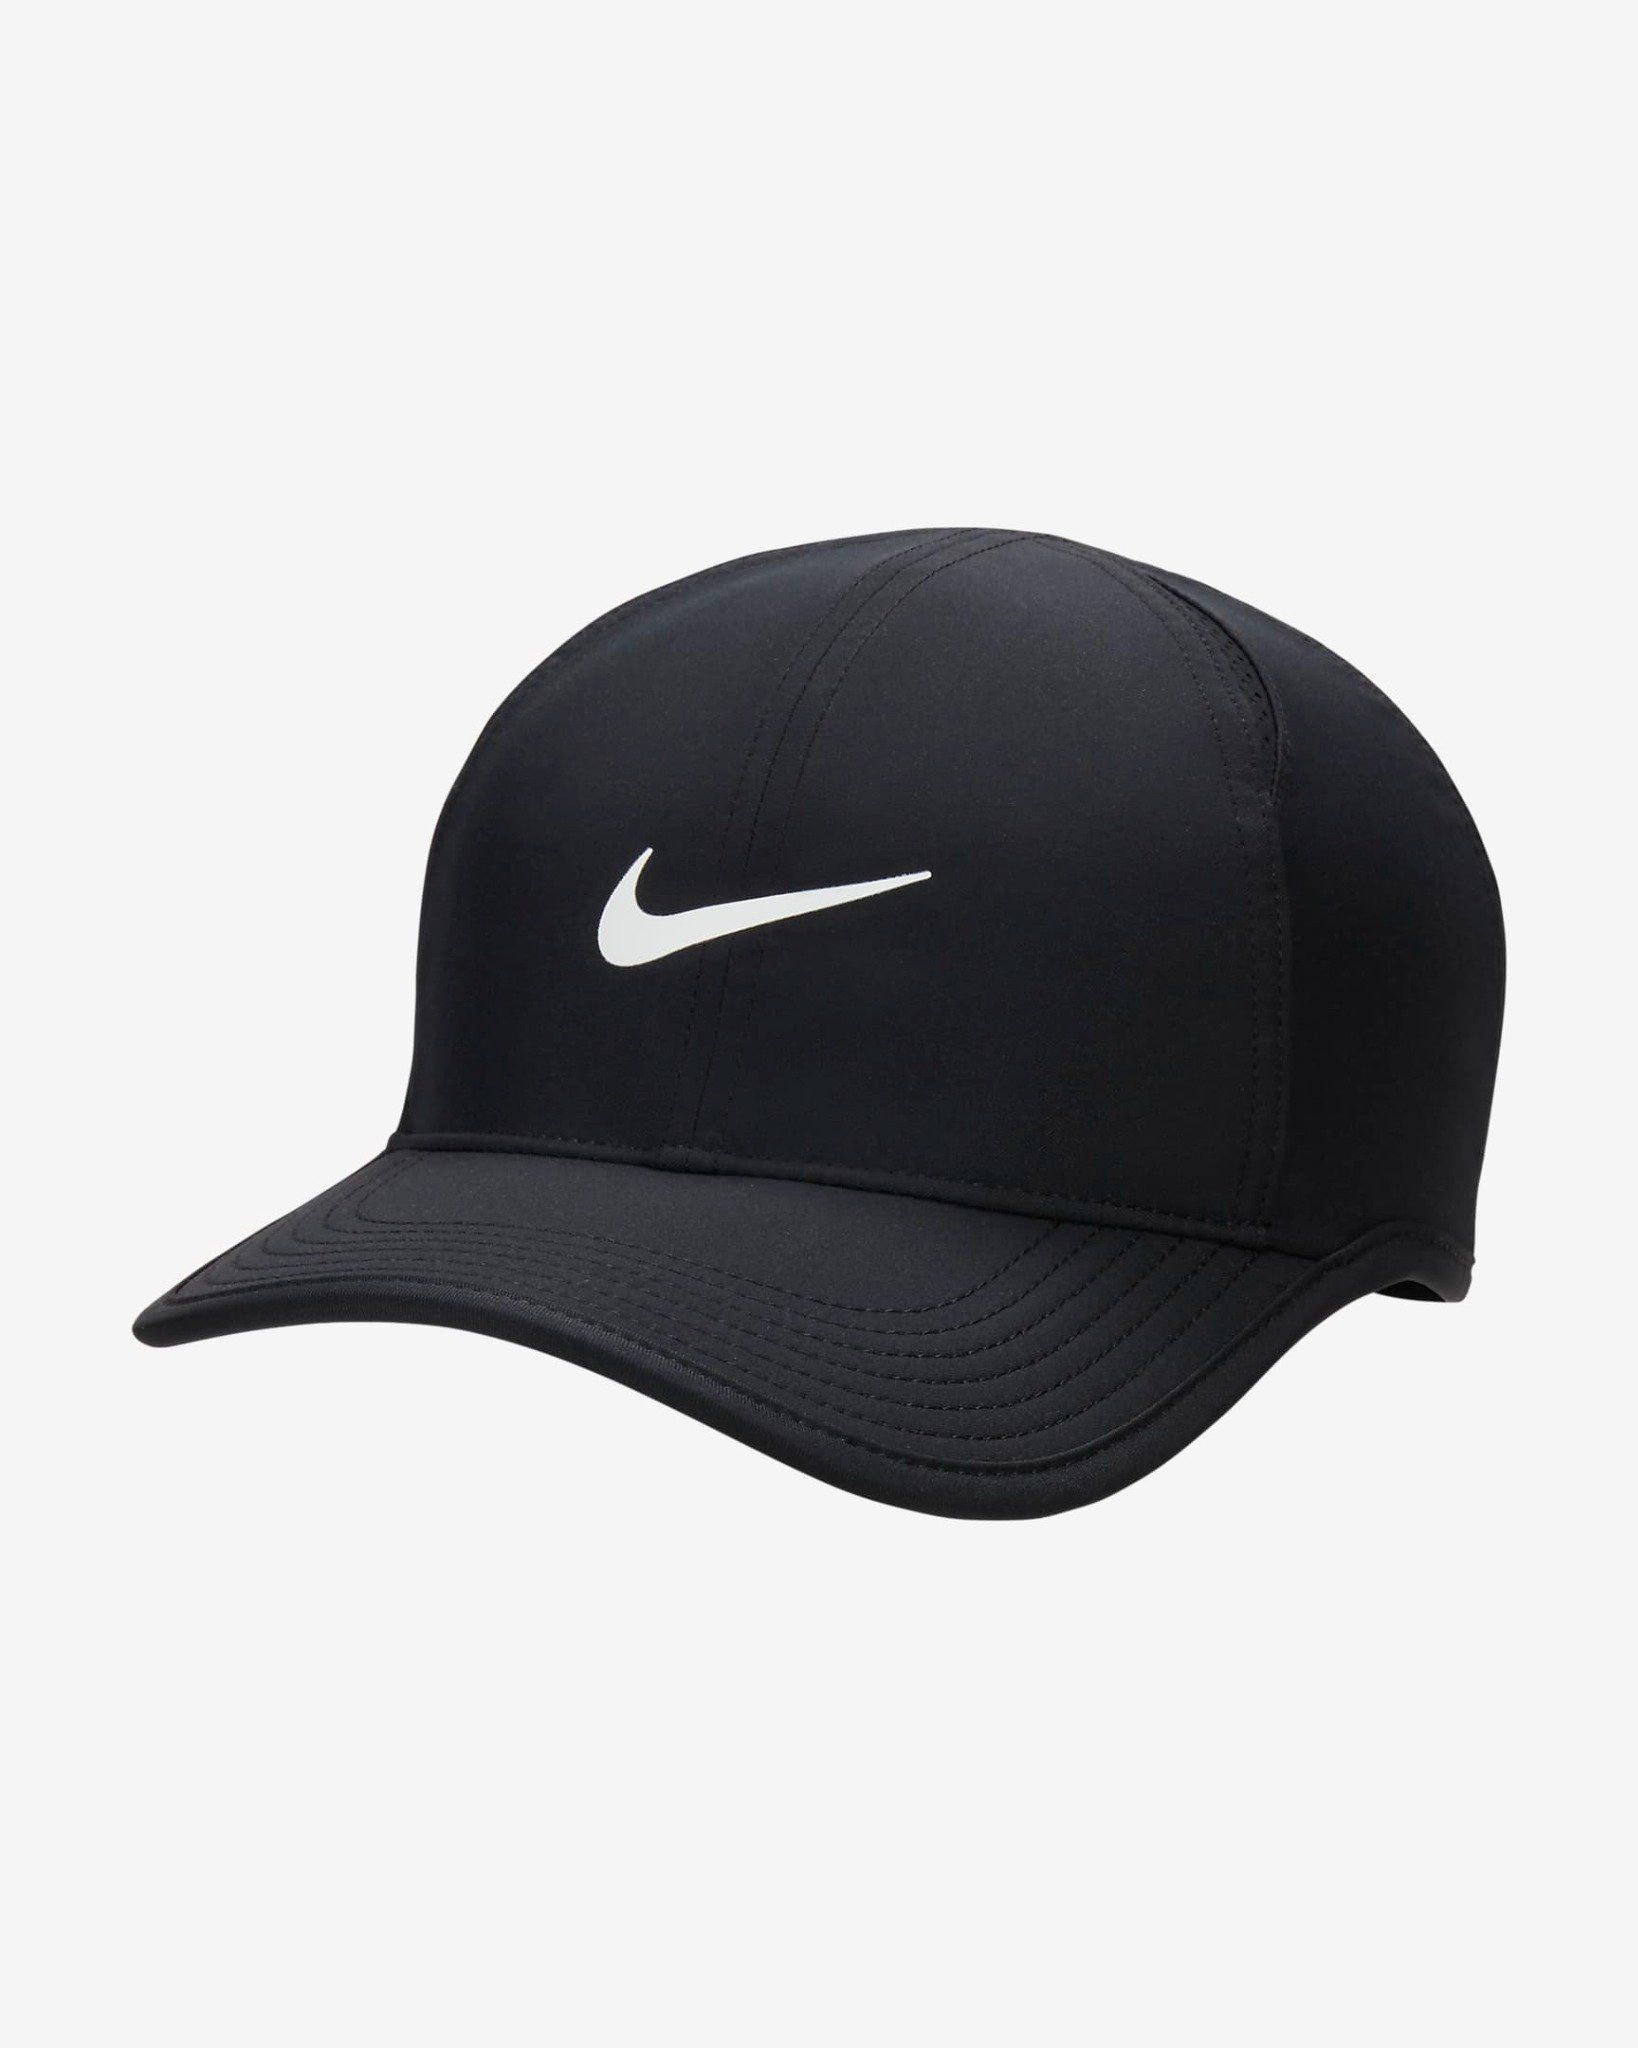 Nike - Nón thể thao Nam Dri-FIT Club Unstructured Featherlight Cap